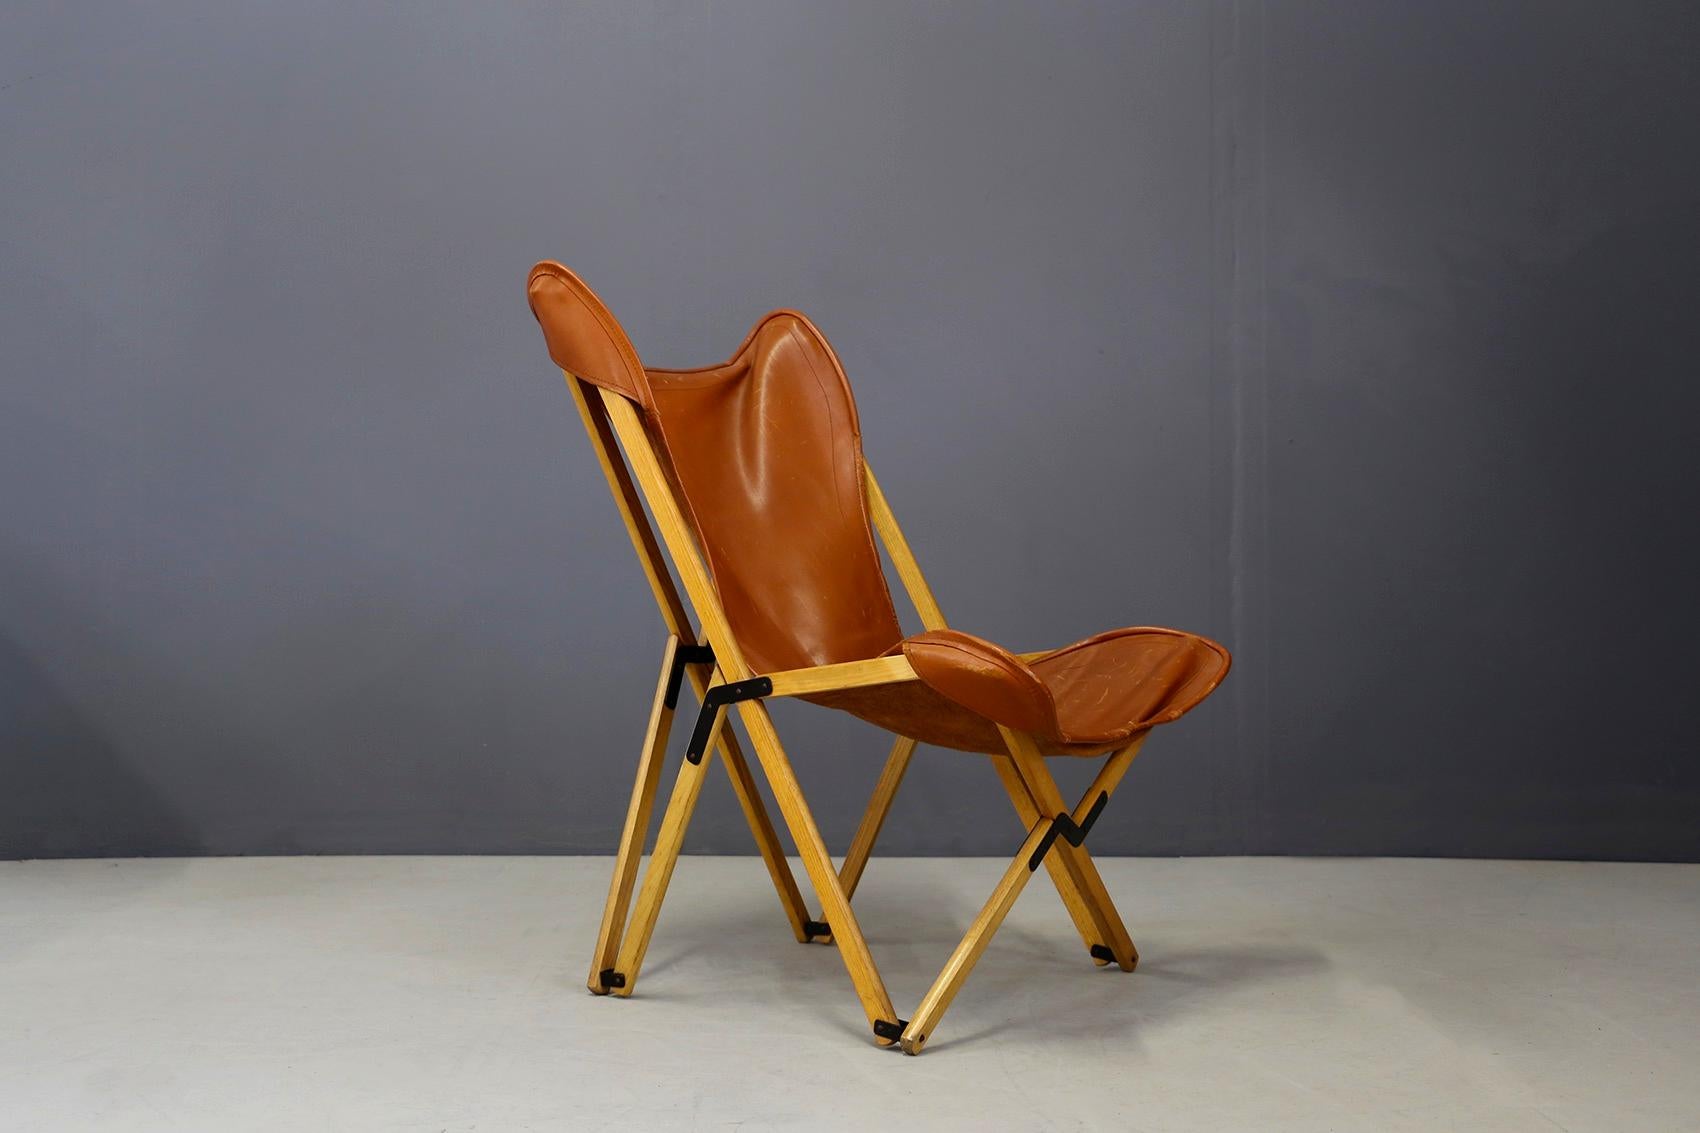 This folding chair by Viganò  is based on the prototypes of folding chairs created in the 19th century by J.B. Fendy, who in turn was inspired by traditional Berber chairs. The Tripolina chair was made before the Second World War by the company from